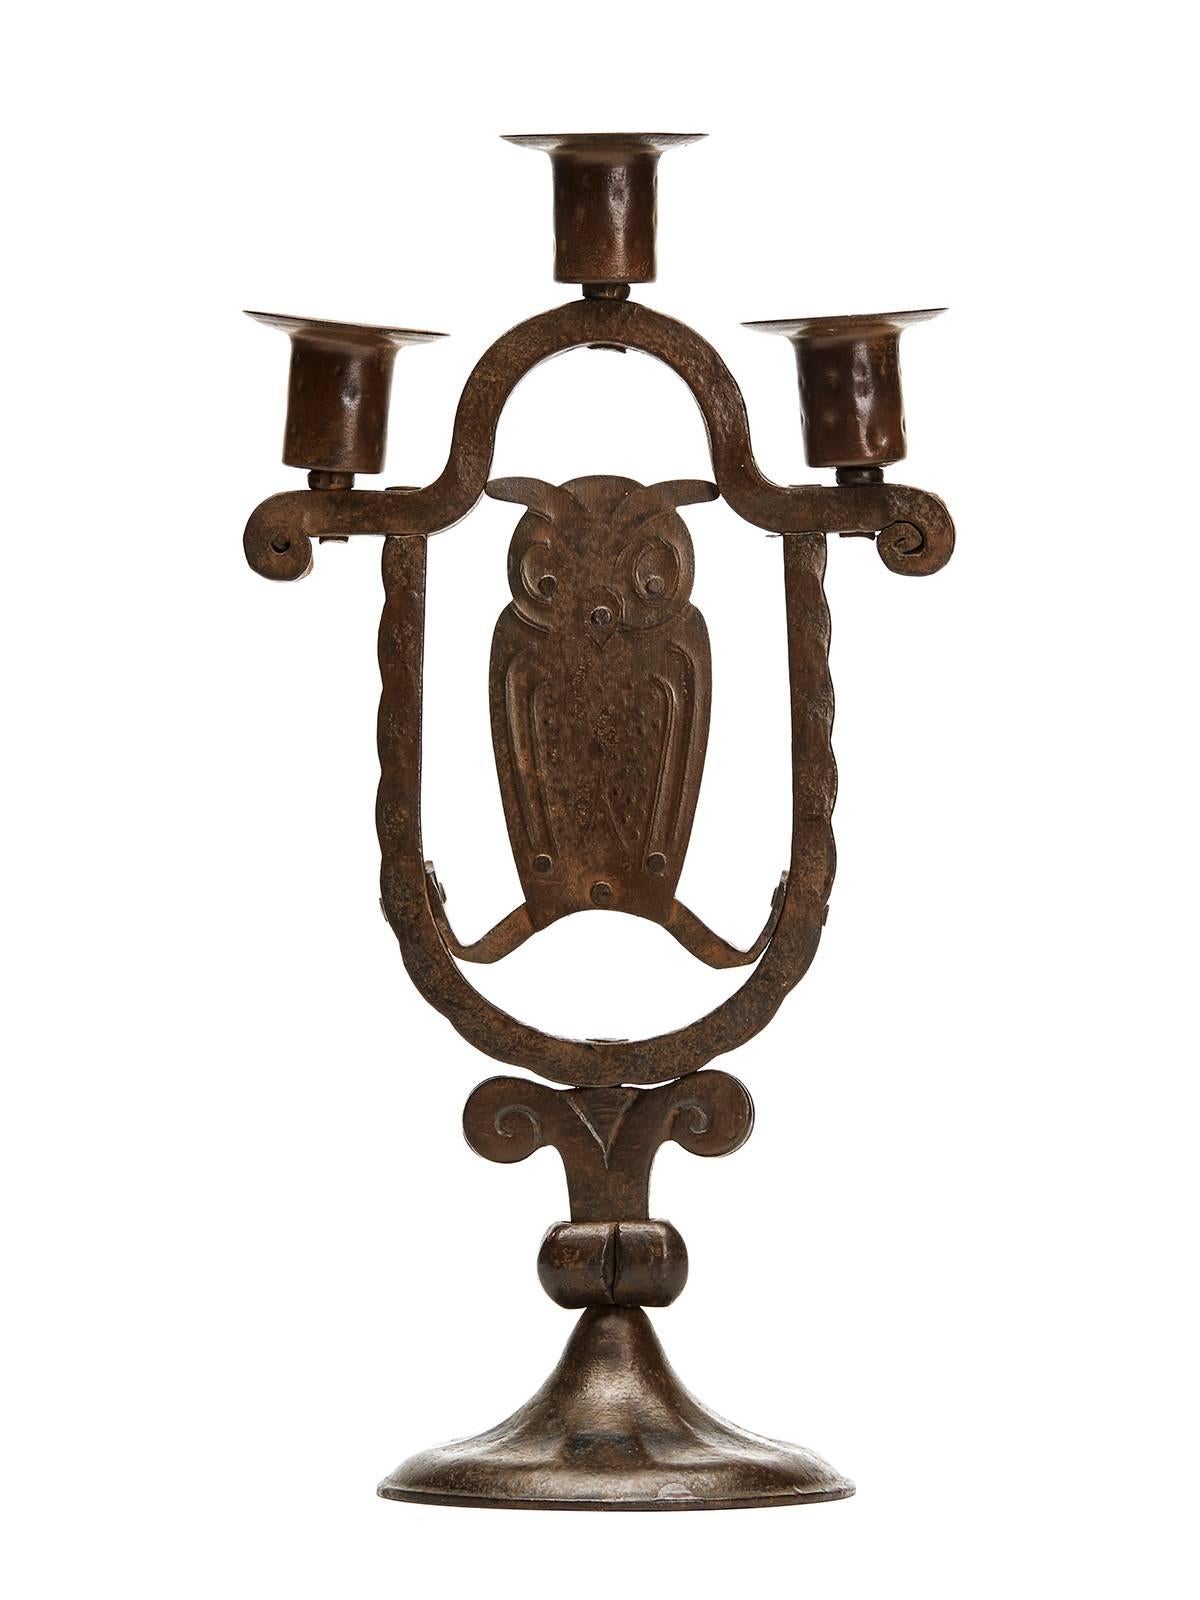 A stylish Austrian Secessionist Industrial art patinated iron triple owl candlestick by Hugo bergere. The candlestick stands on a wide rounded domed foot with box iron arms with a central raised candle holder and two lower mounted holders to either